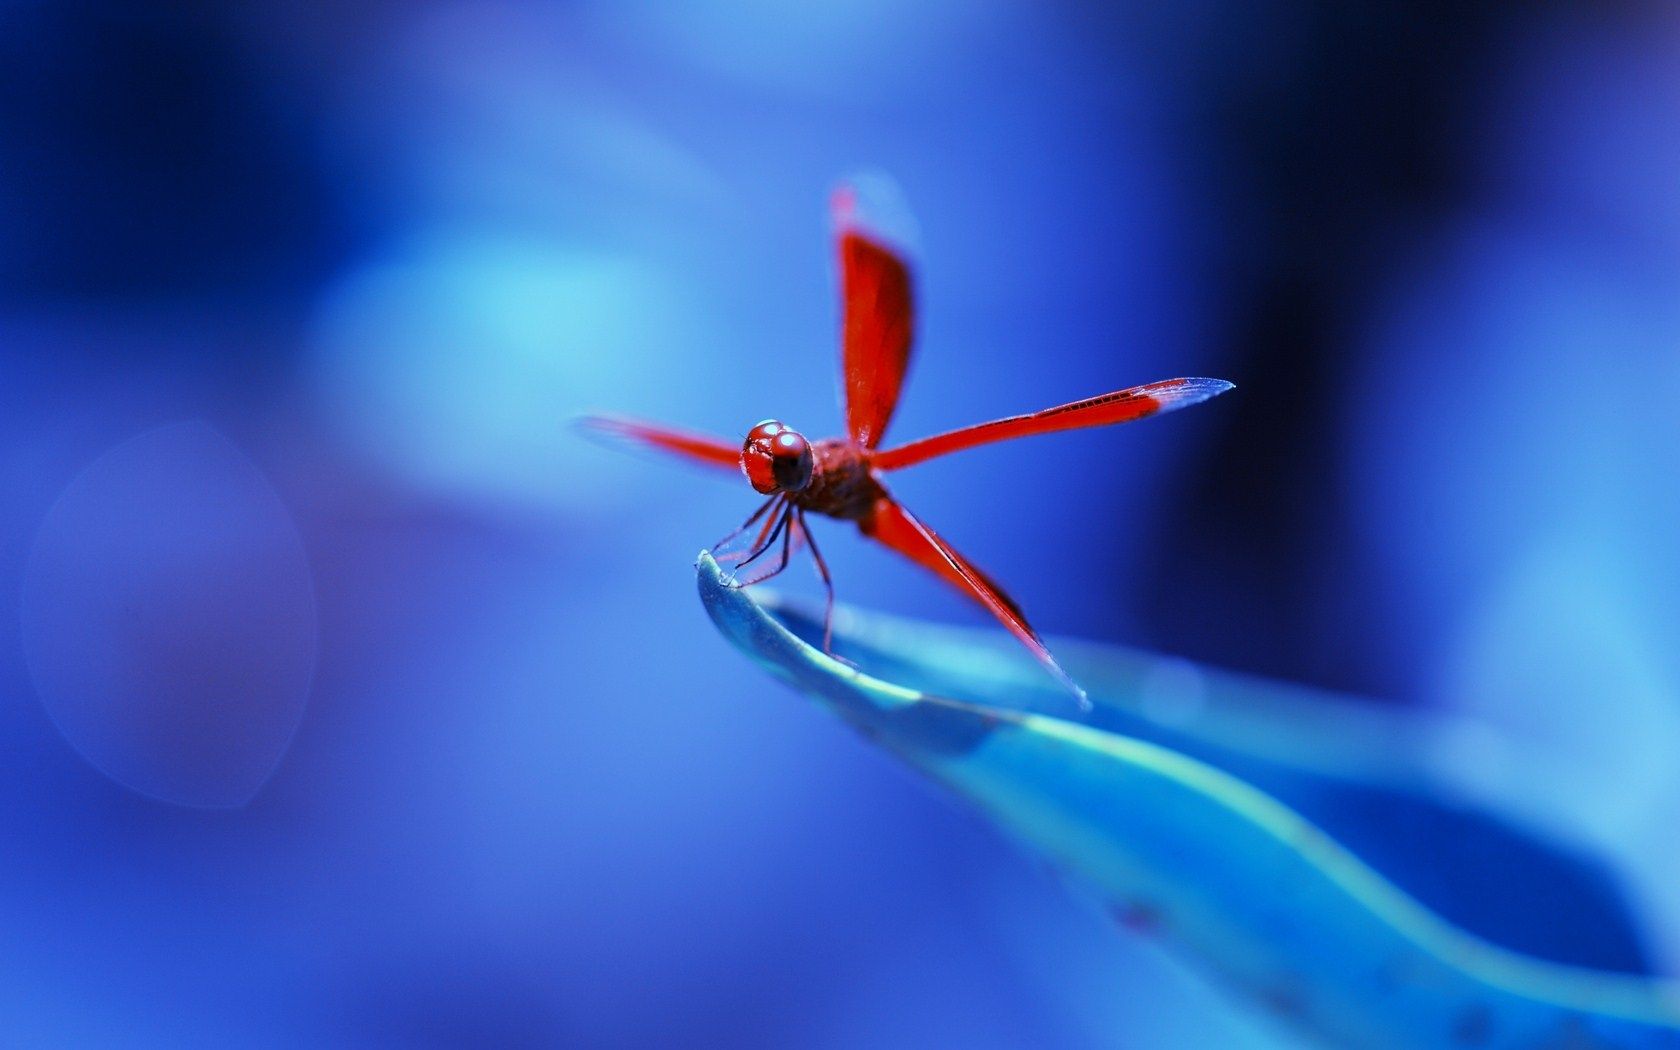 HD wallpaper, Pictures, Dragonfly